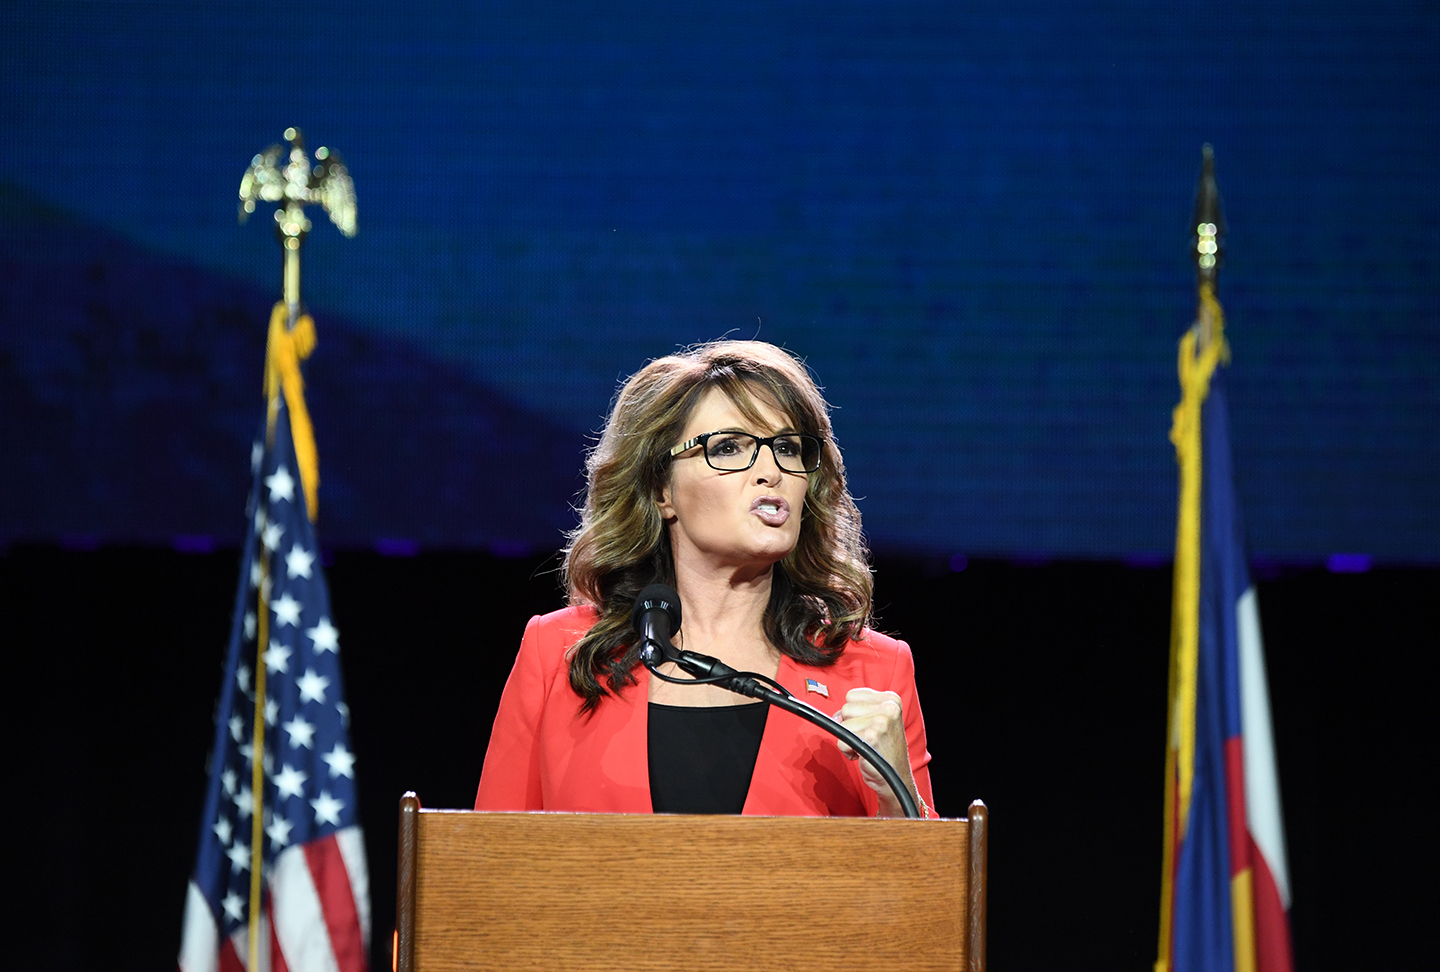 Former GOP vice presidential candidate Sarah Palin speaks during the 2016 Western Conservative Summit the Colorado Convention Center in Denver, July 01, 2016. It is the 7th annual Western Conservative Summit